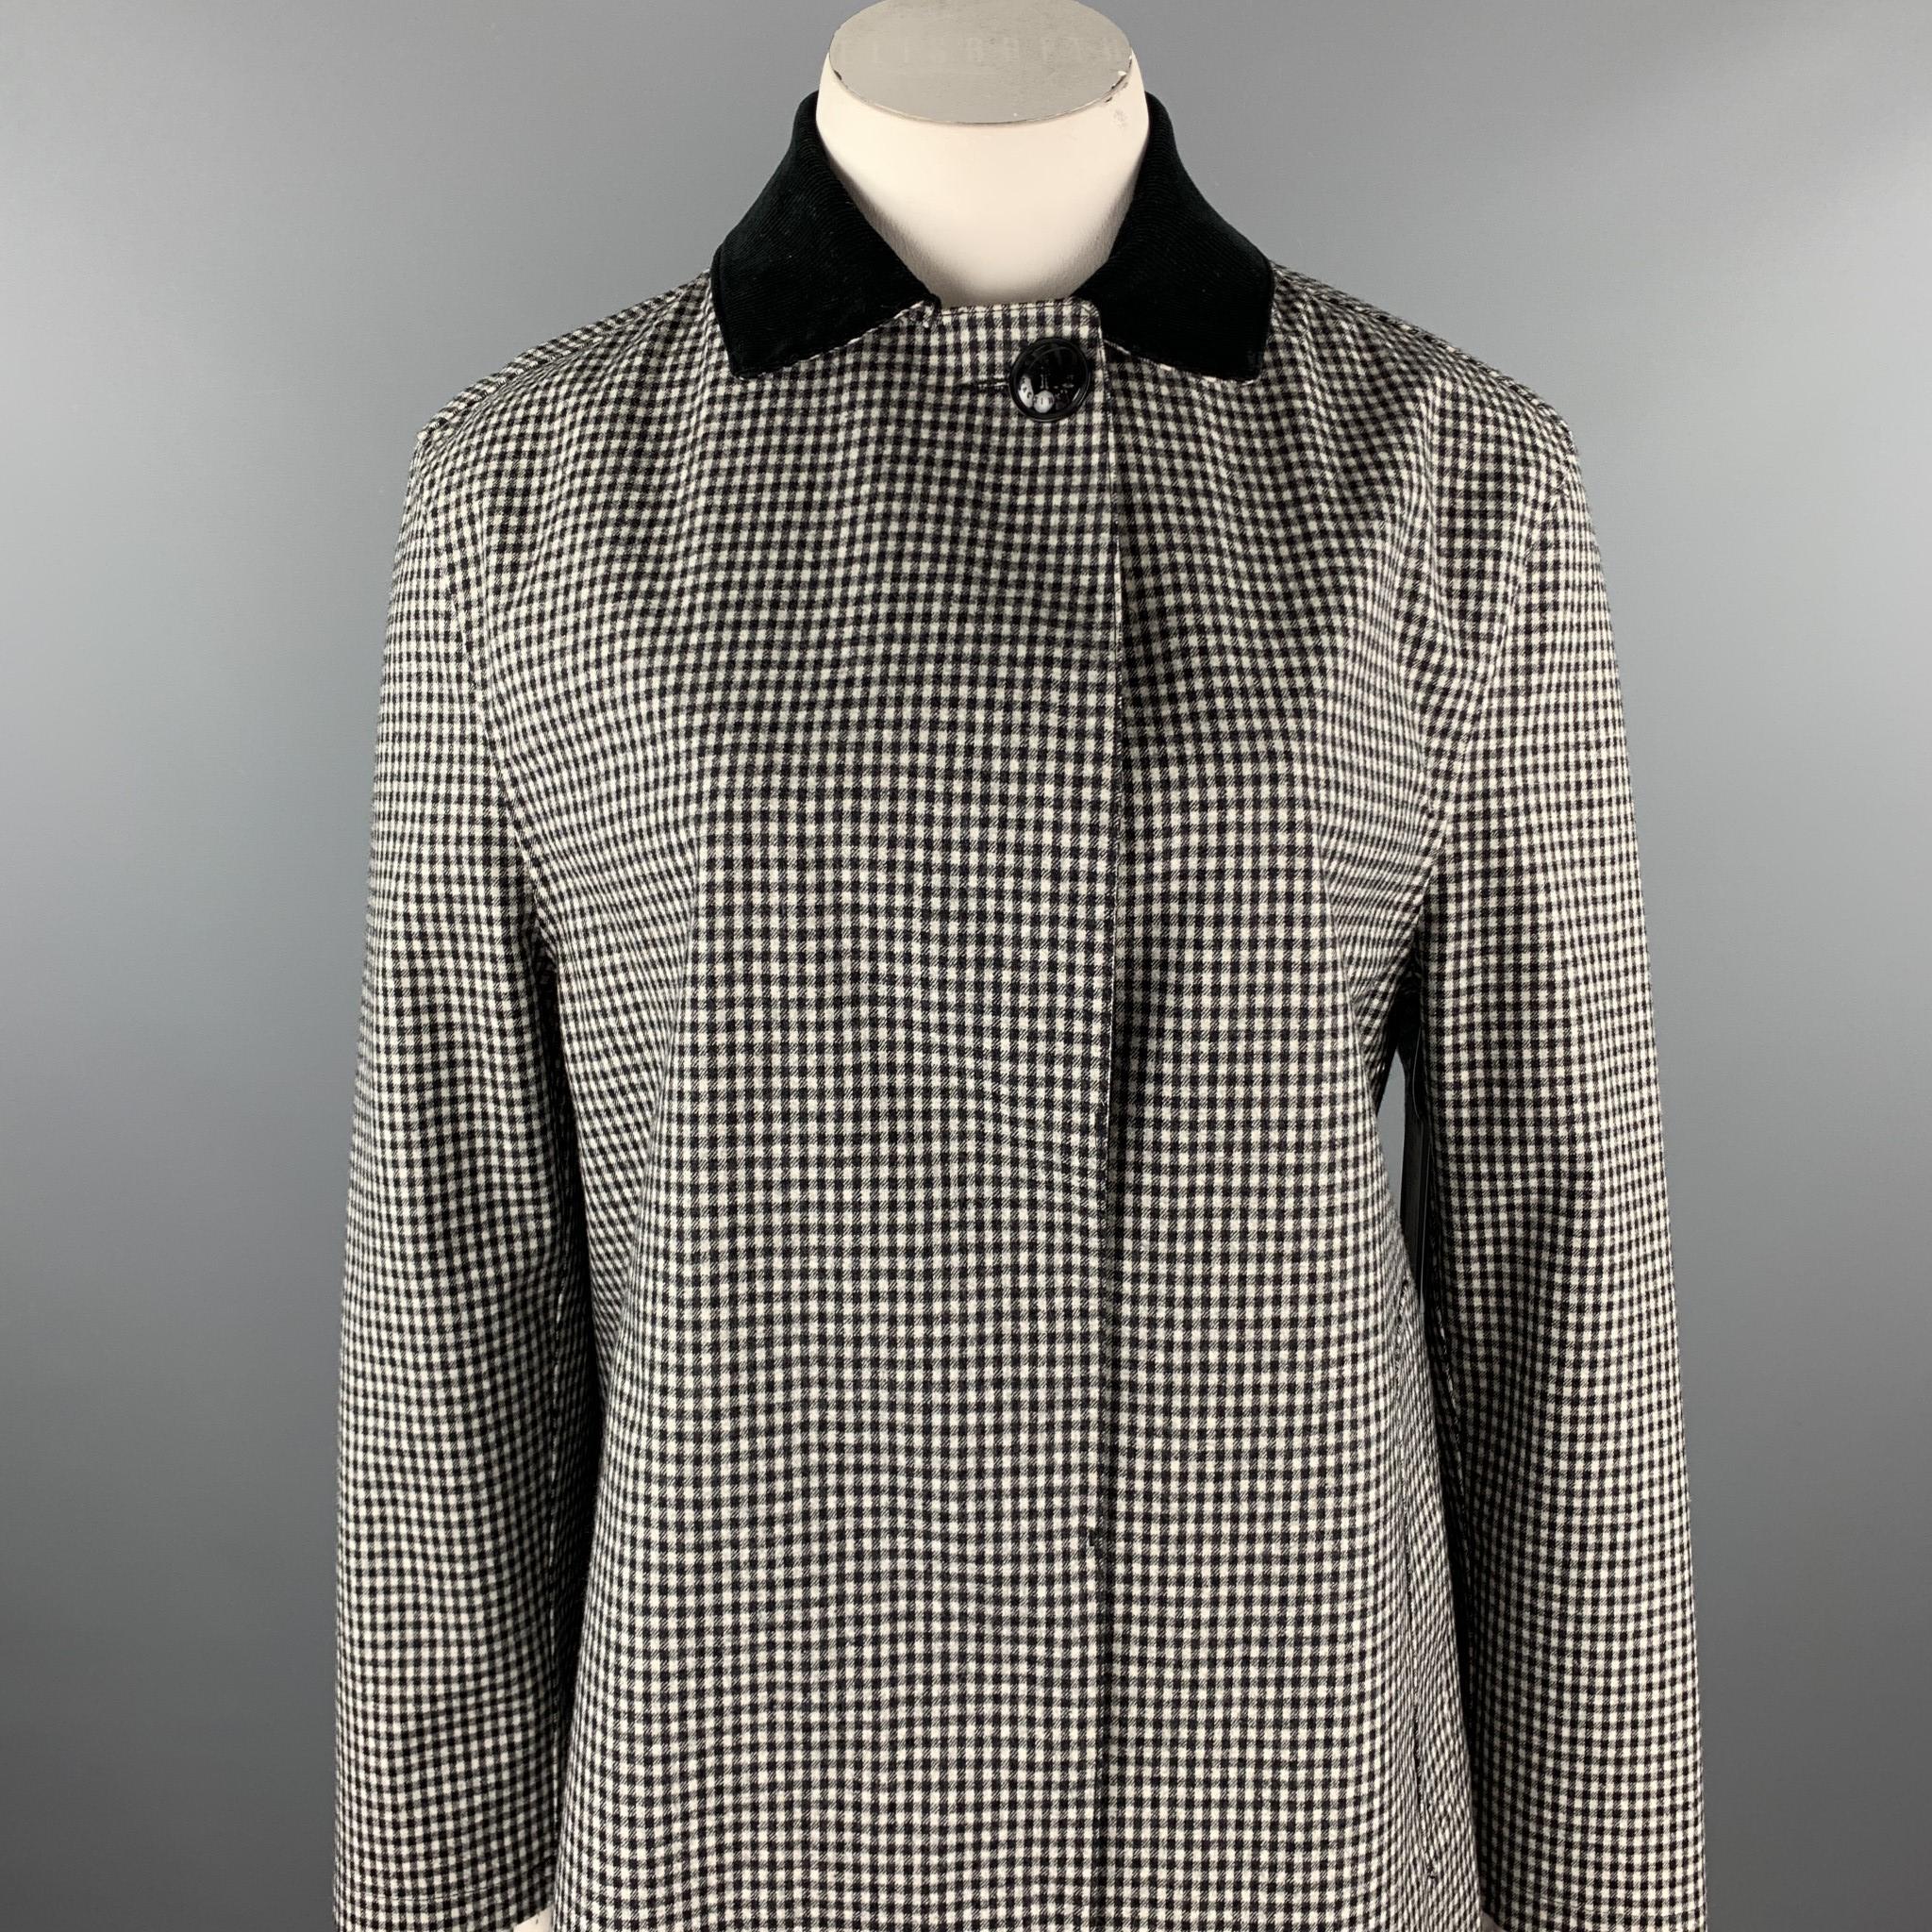 MACKINTOSH coat comes in a black & white checkered wool with a red window pane liner featuring a corduroy collar, underarm grommet holes, and a hidden button closure. Handmade.

Excellent Pre-Owned Condition.
Marked: No size